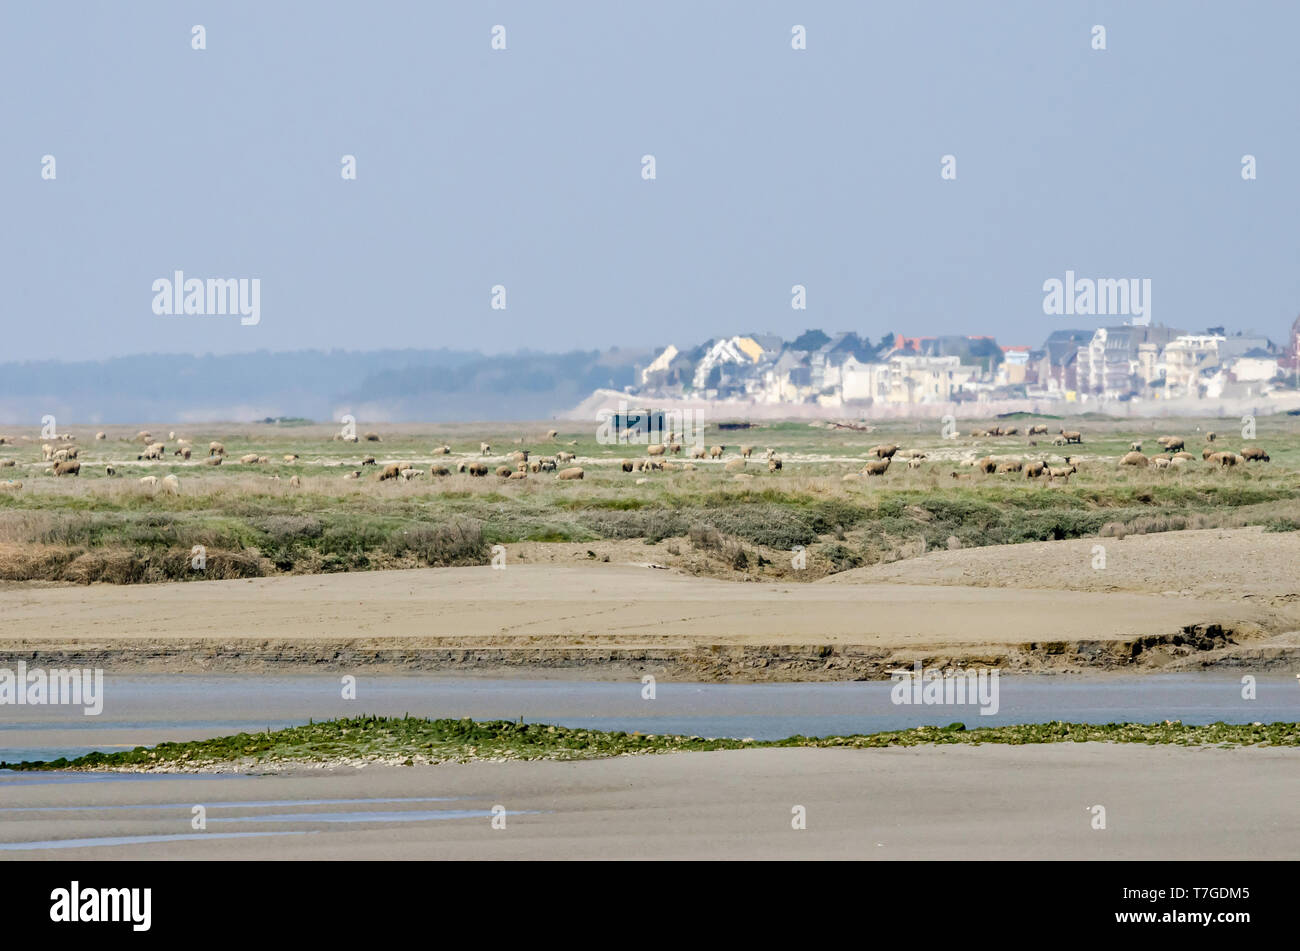 Salt marsh and sheep in the French Baie de somme Stock Photo